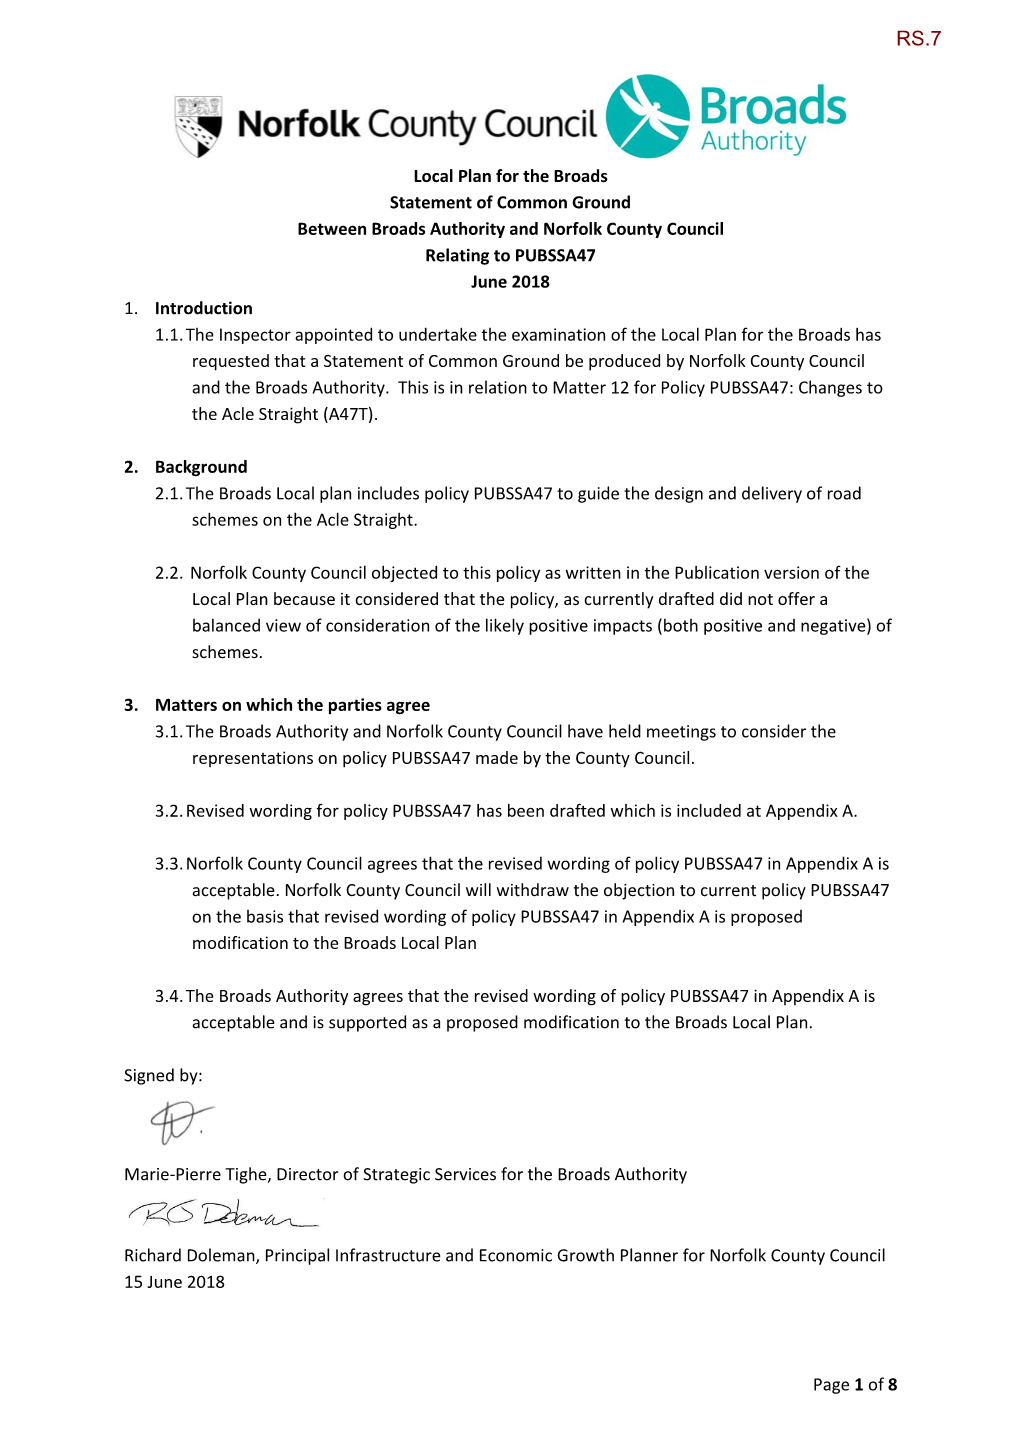 Page 1 of 8 Local Plan for the Broads Statement of Common Ground Between Broads Authority and Norfolk County Council Relating To